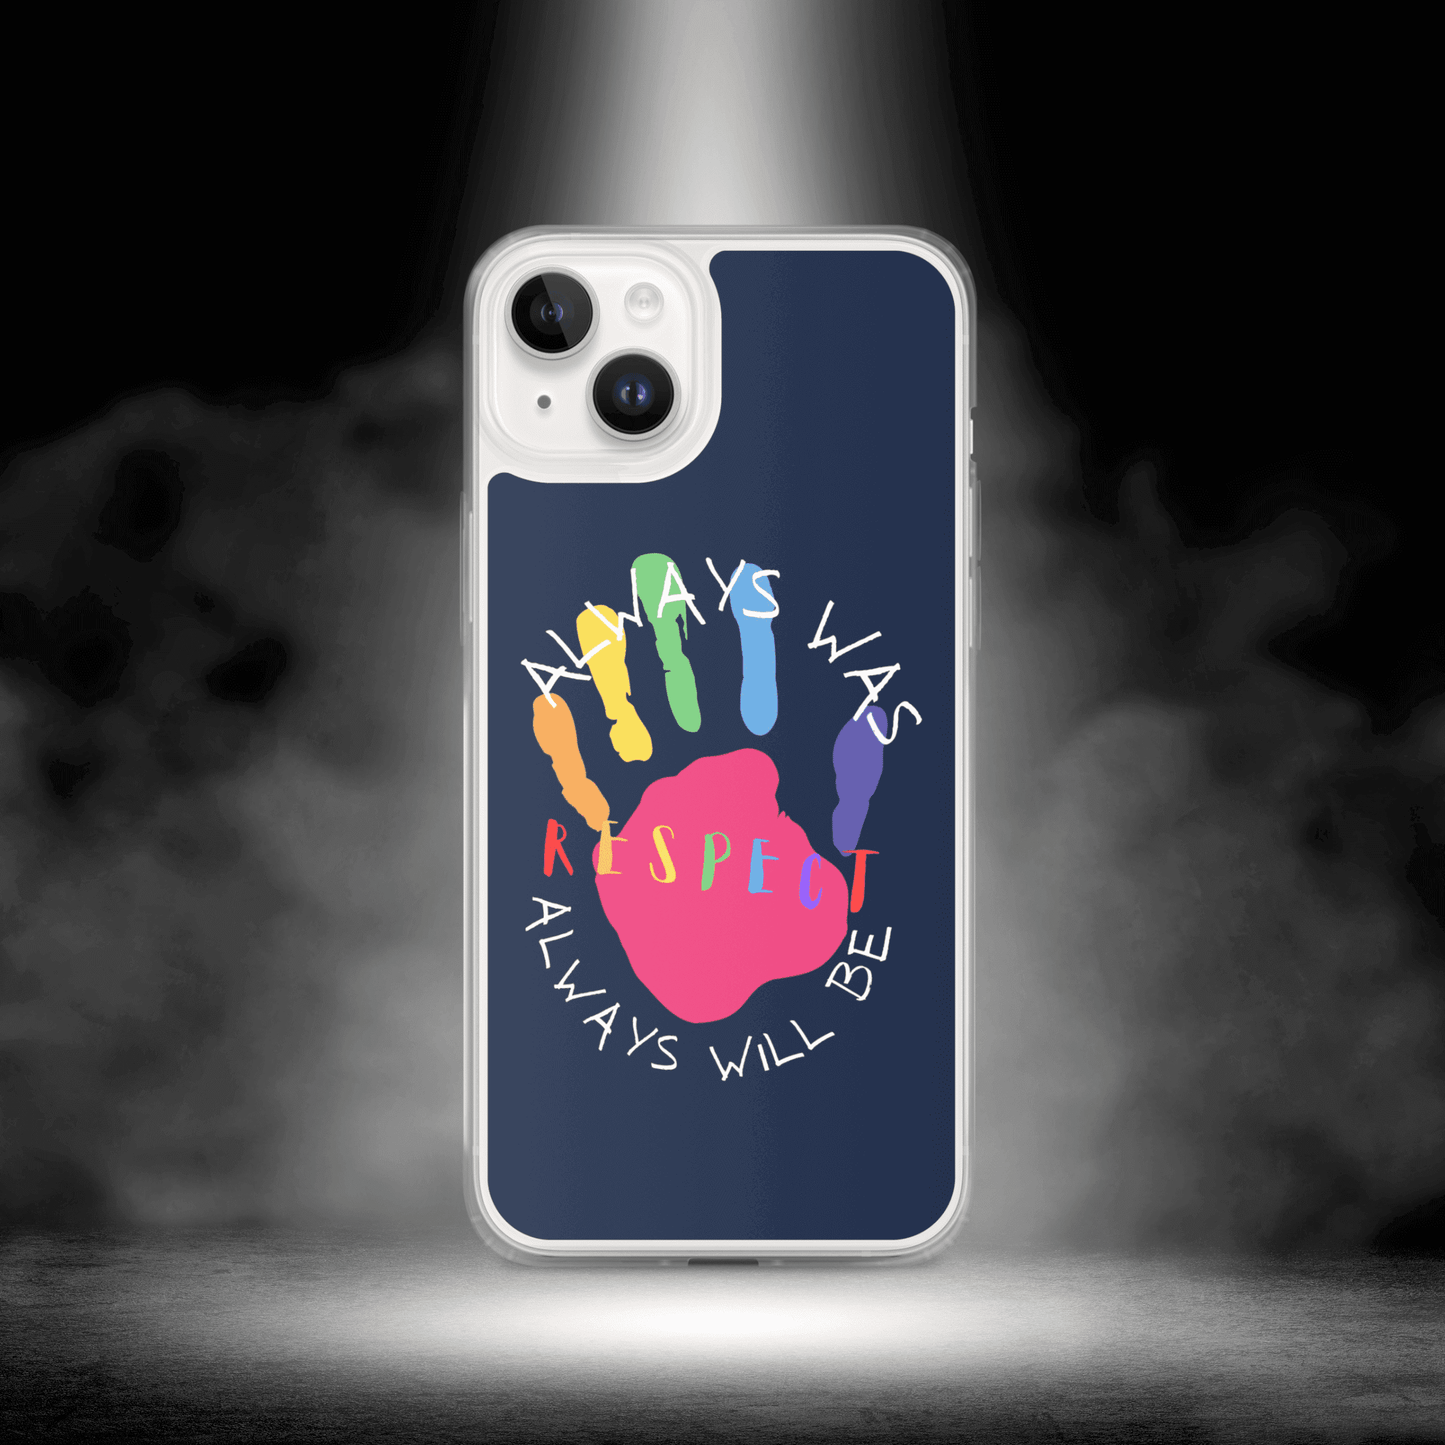 iPhone Cover - Always was, always will be - BiteMeNow